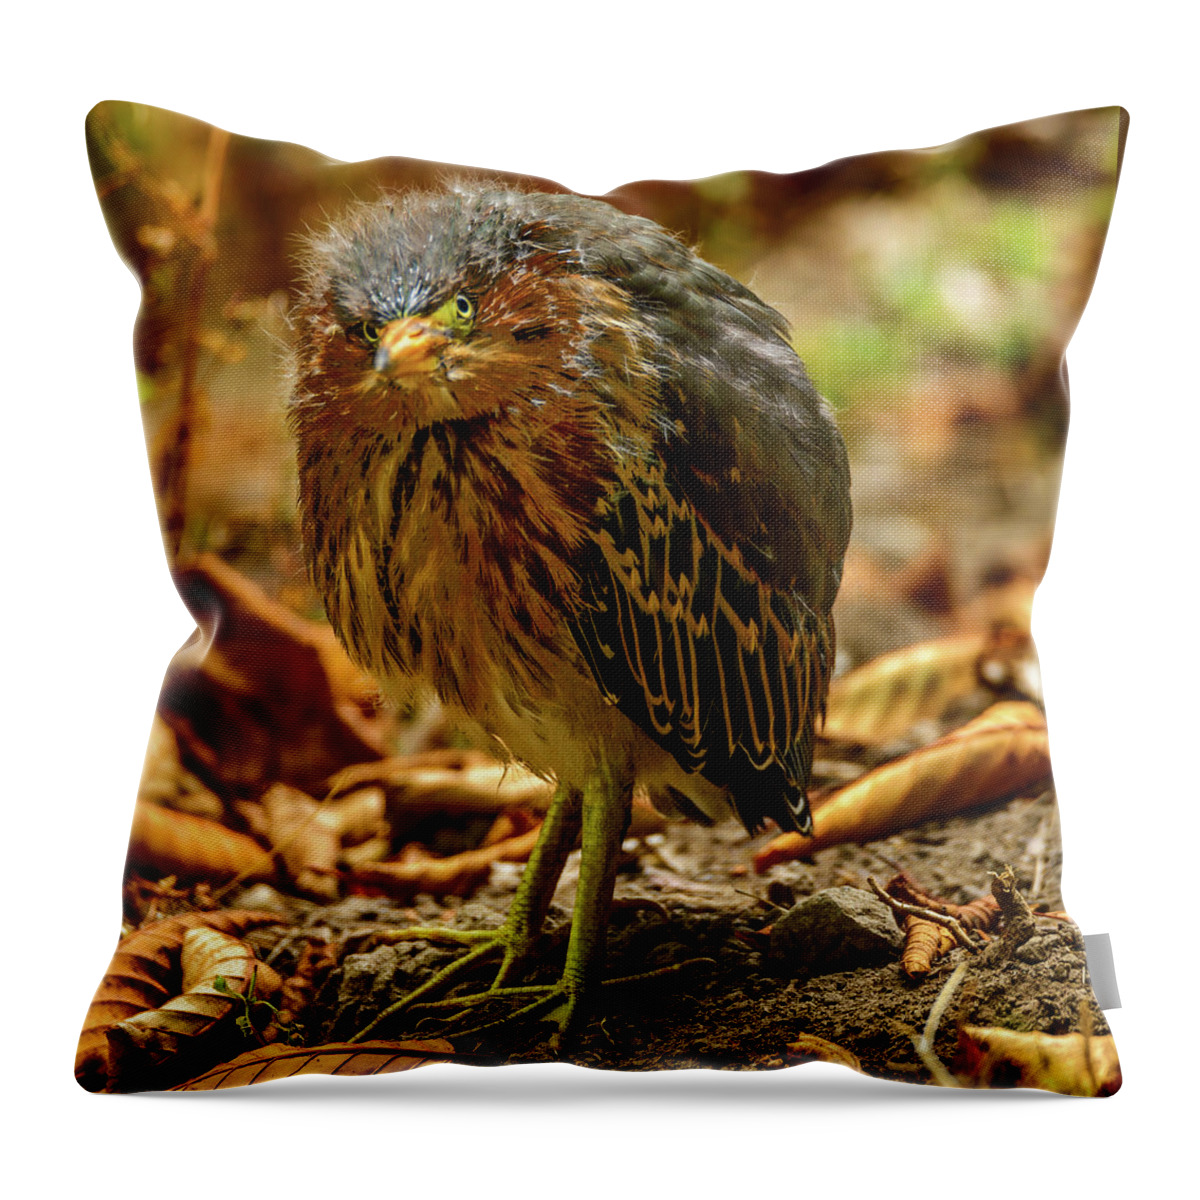 Cute Throw Pillow featuring the photograph Cute Green Heron by Jerry Cahill